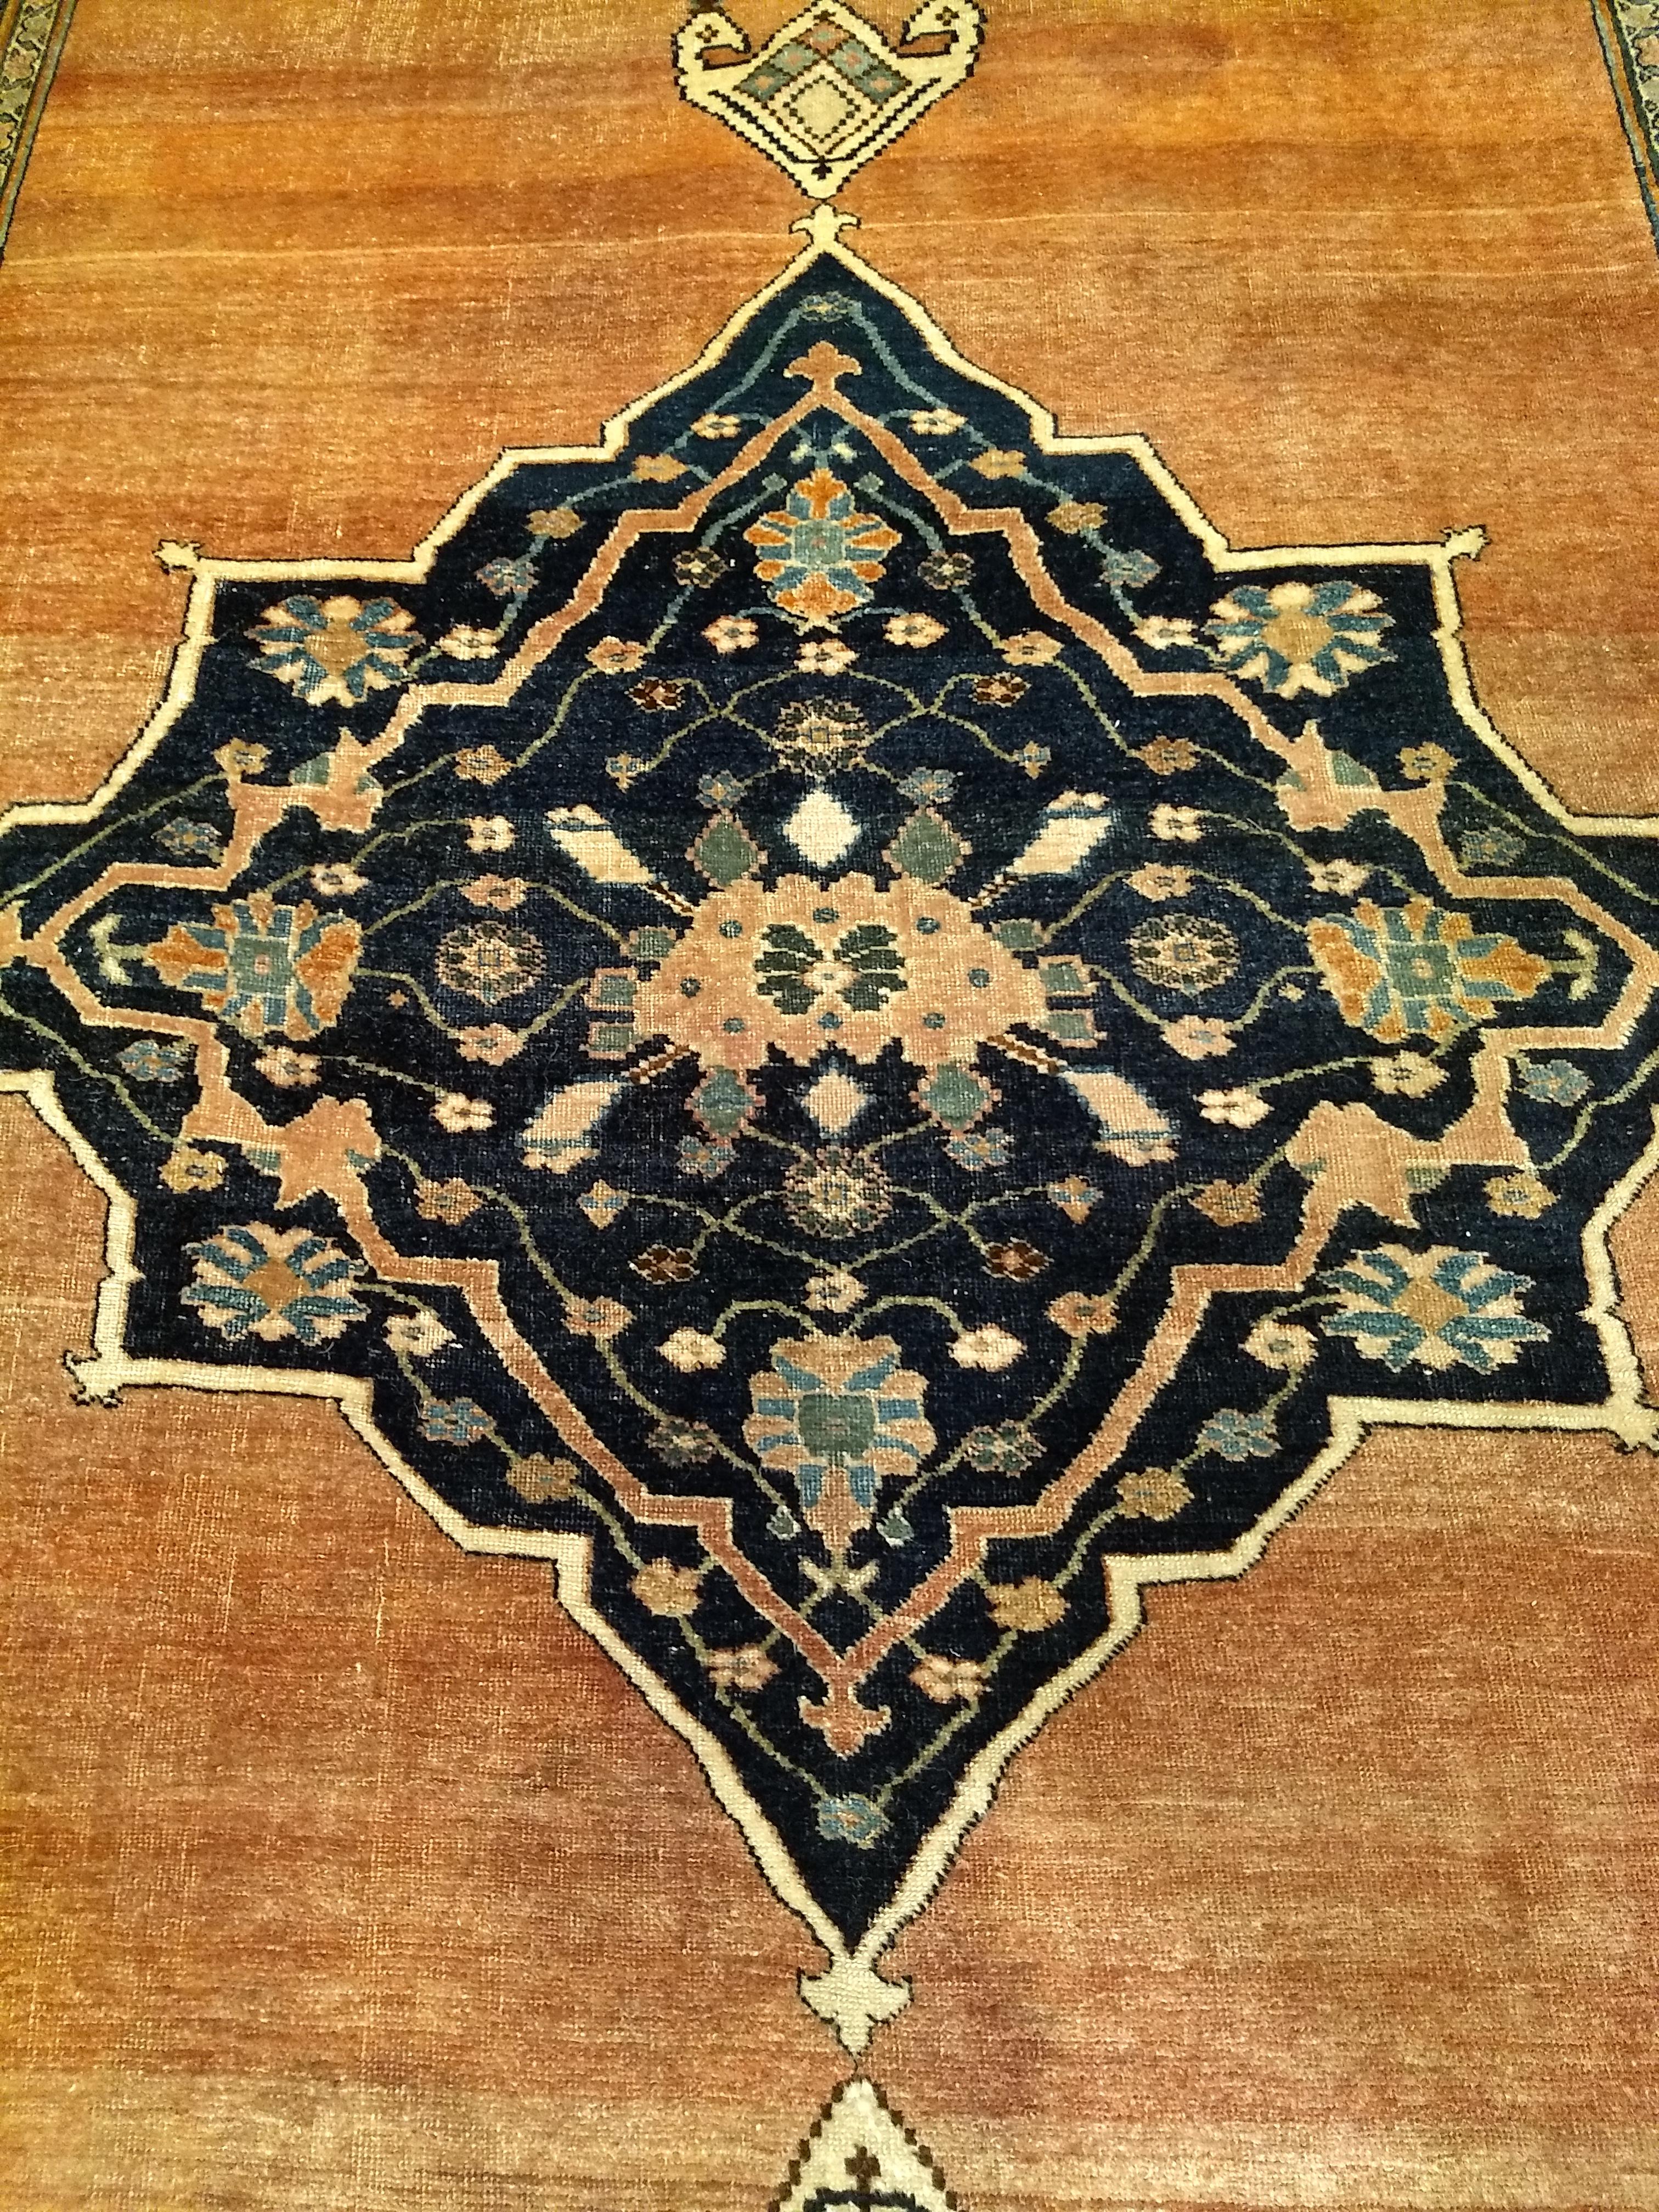 19th Century Persian Bidjar Gallery Rug in Brick-Red, Navy, Turquoise, Yellow For Sale 3